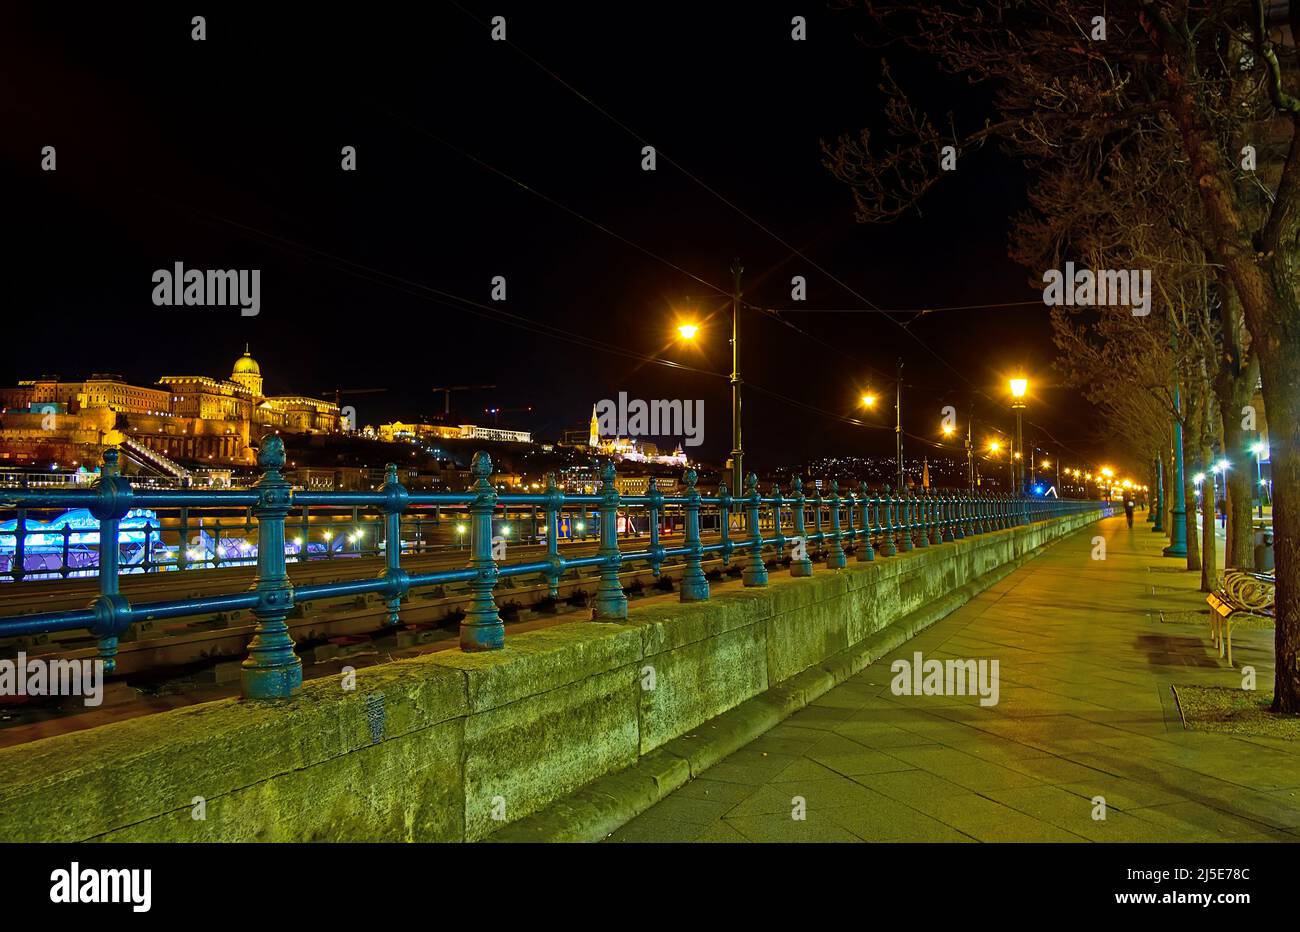 The bright illumination of Buda Castle, located atop the Castle Hill in Buda district, seen from embankment of Danube River in Pest district, Budapest Stock Photo